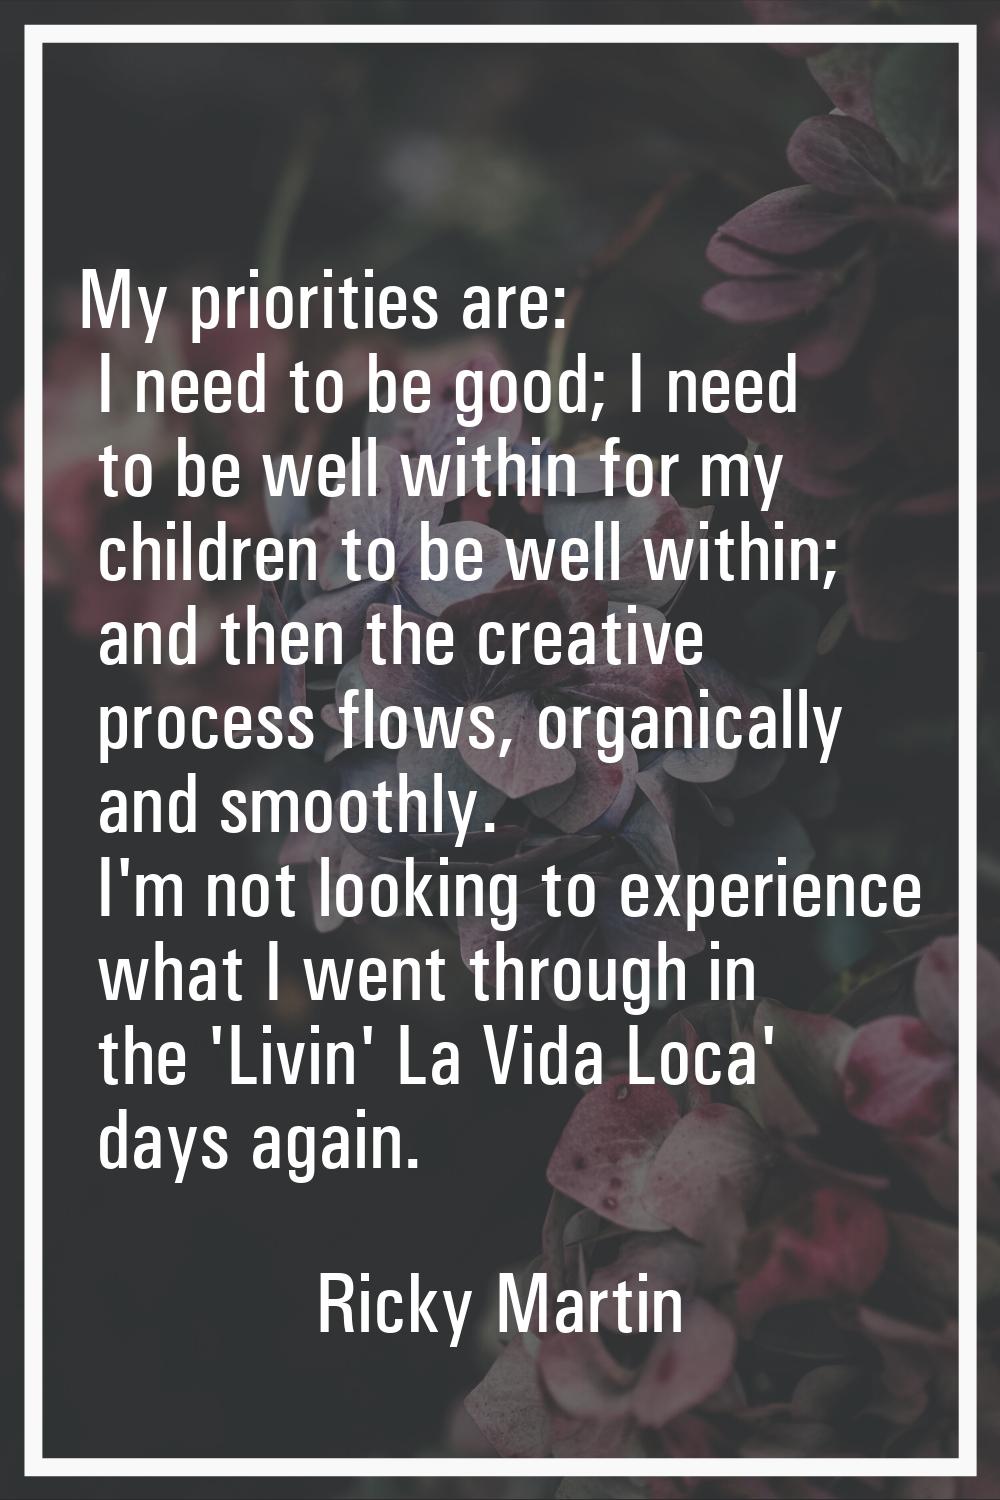 My priorities are: I need to be good; I need to be well within for my children to be well within; a